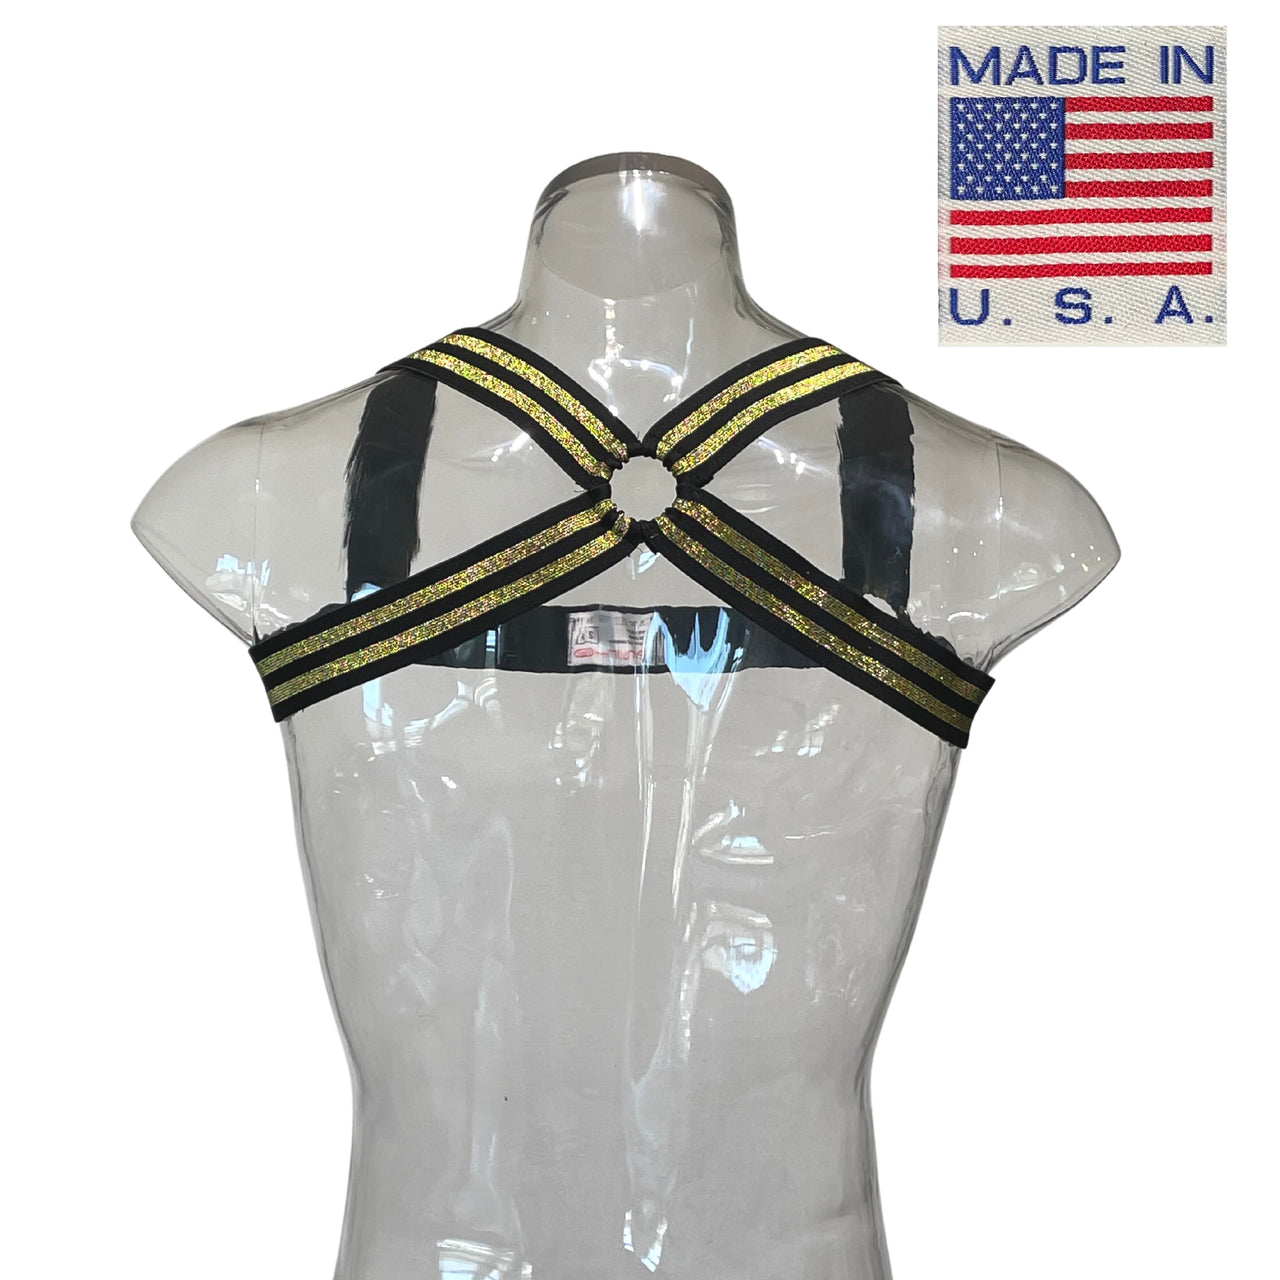 The Black and Gold Saulho Harness